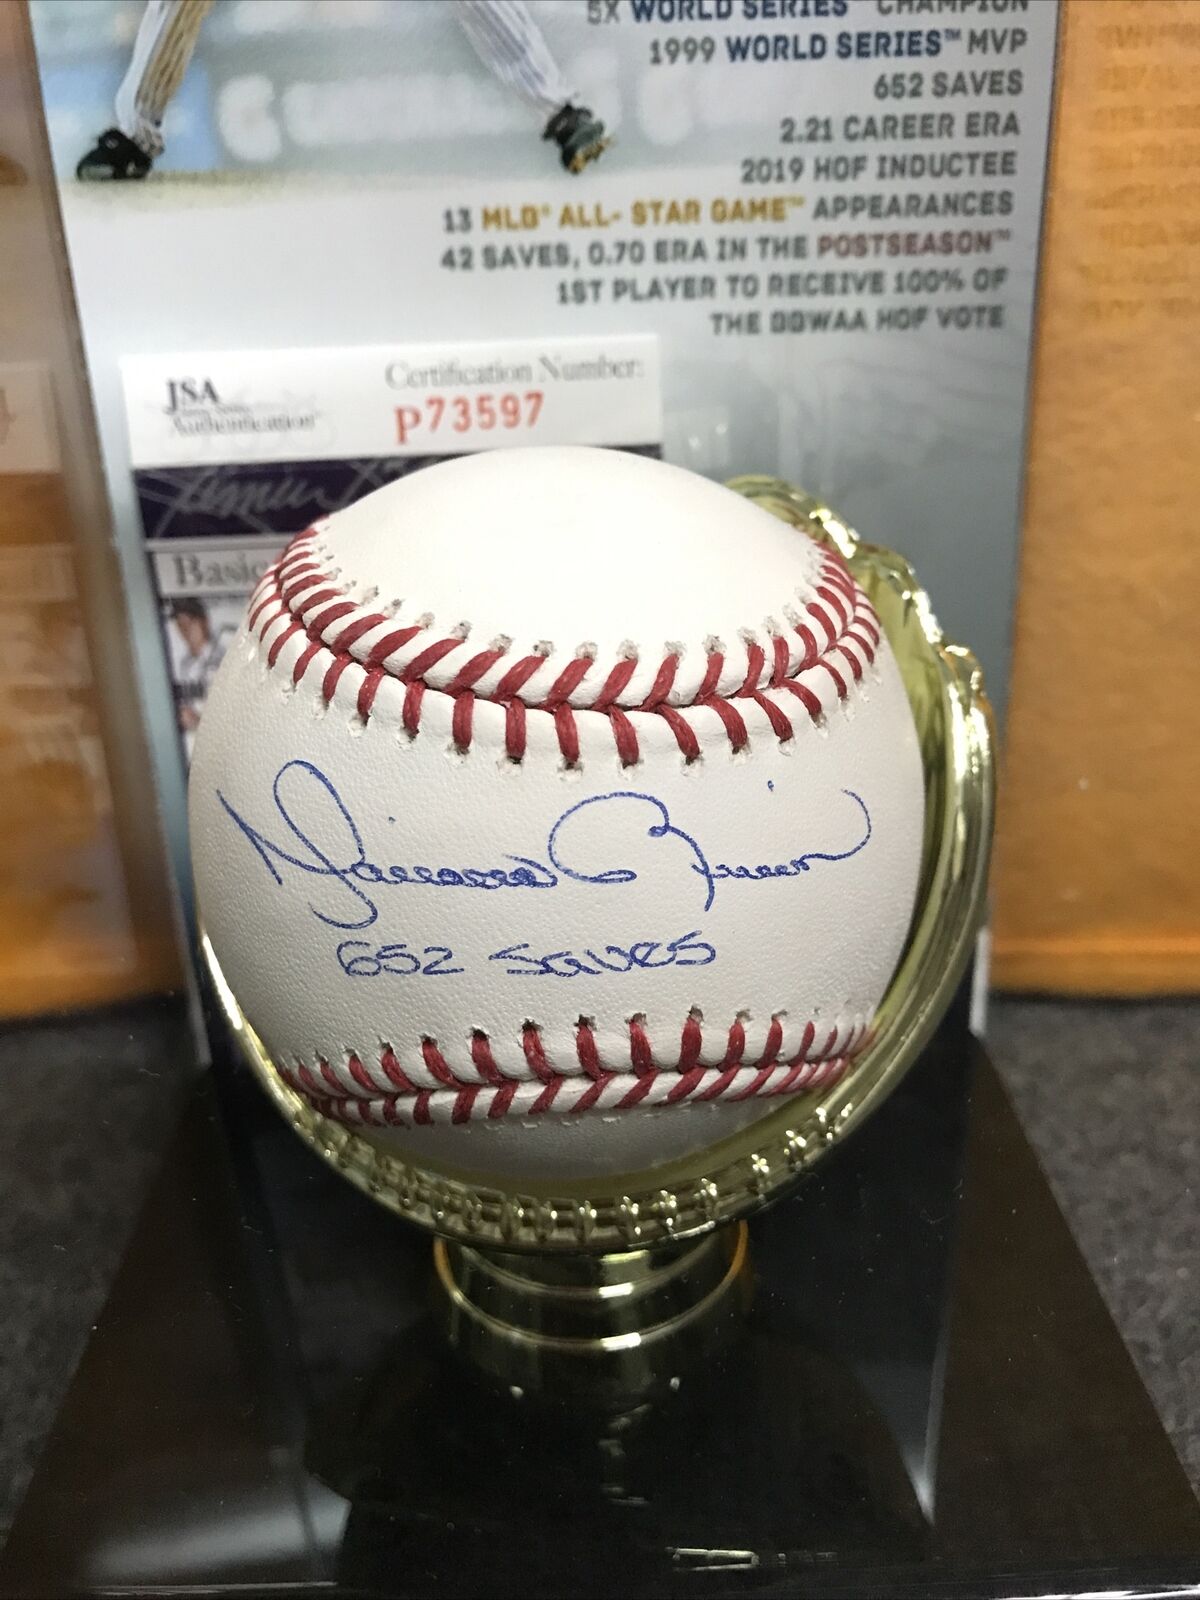 Mariano Rivera New York Yankees Autographed Baseball with Career